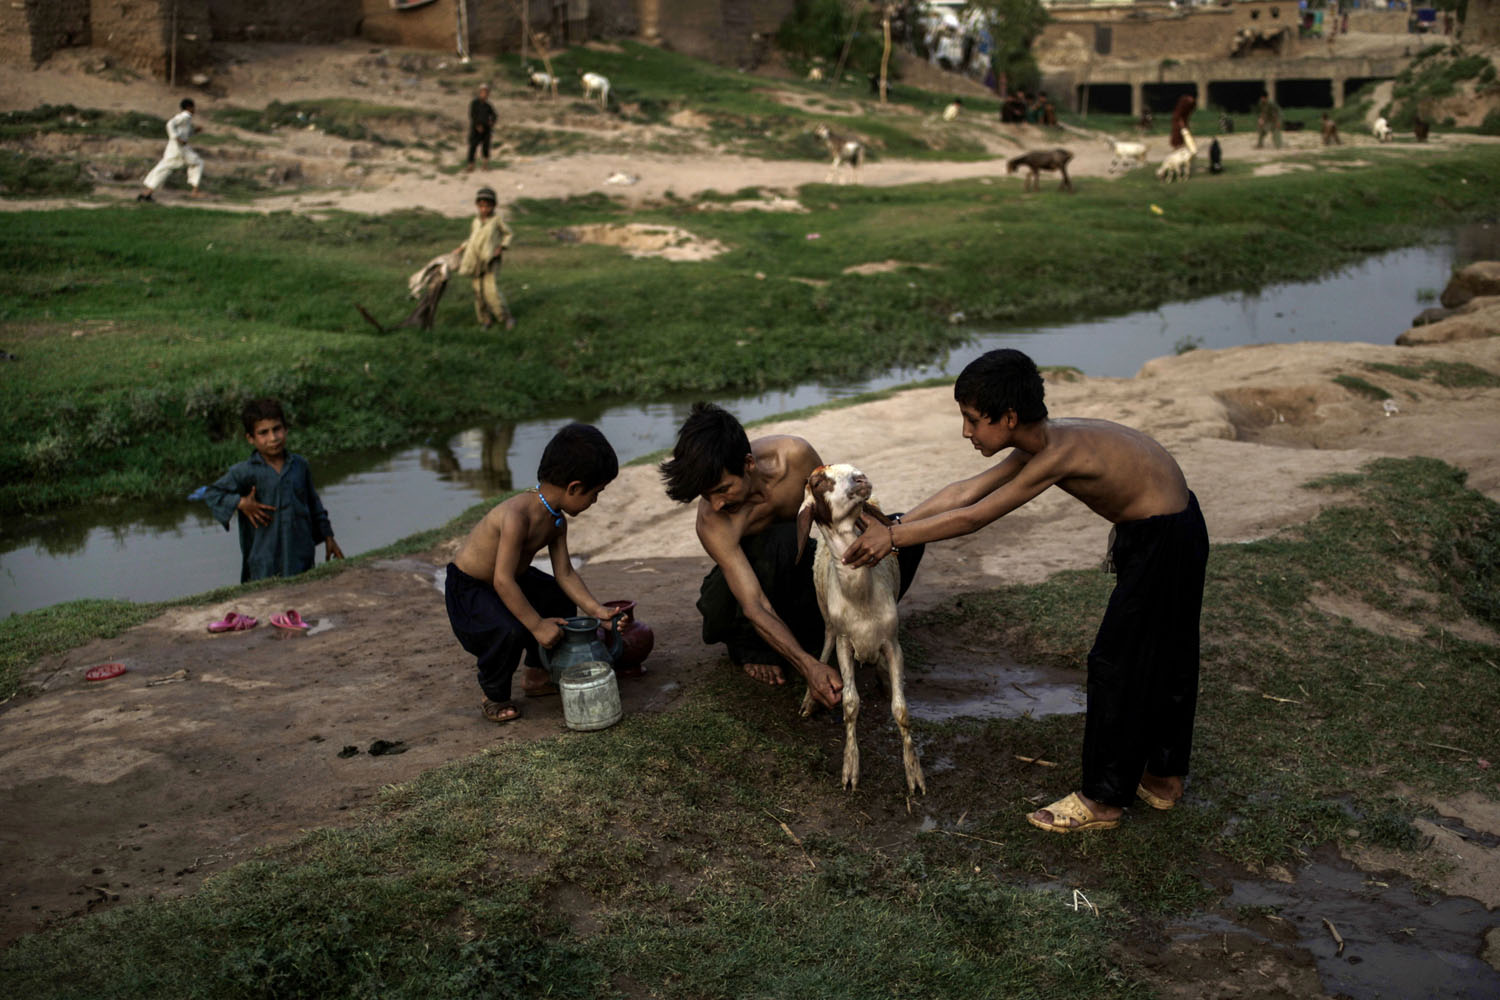 June 24, 2013. A Pakistani man and his two sons, wash their goat by a polluted stream on the outskirts of Islamabad, Pakistan.